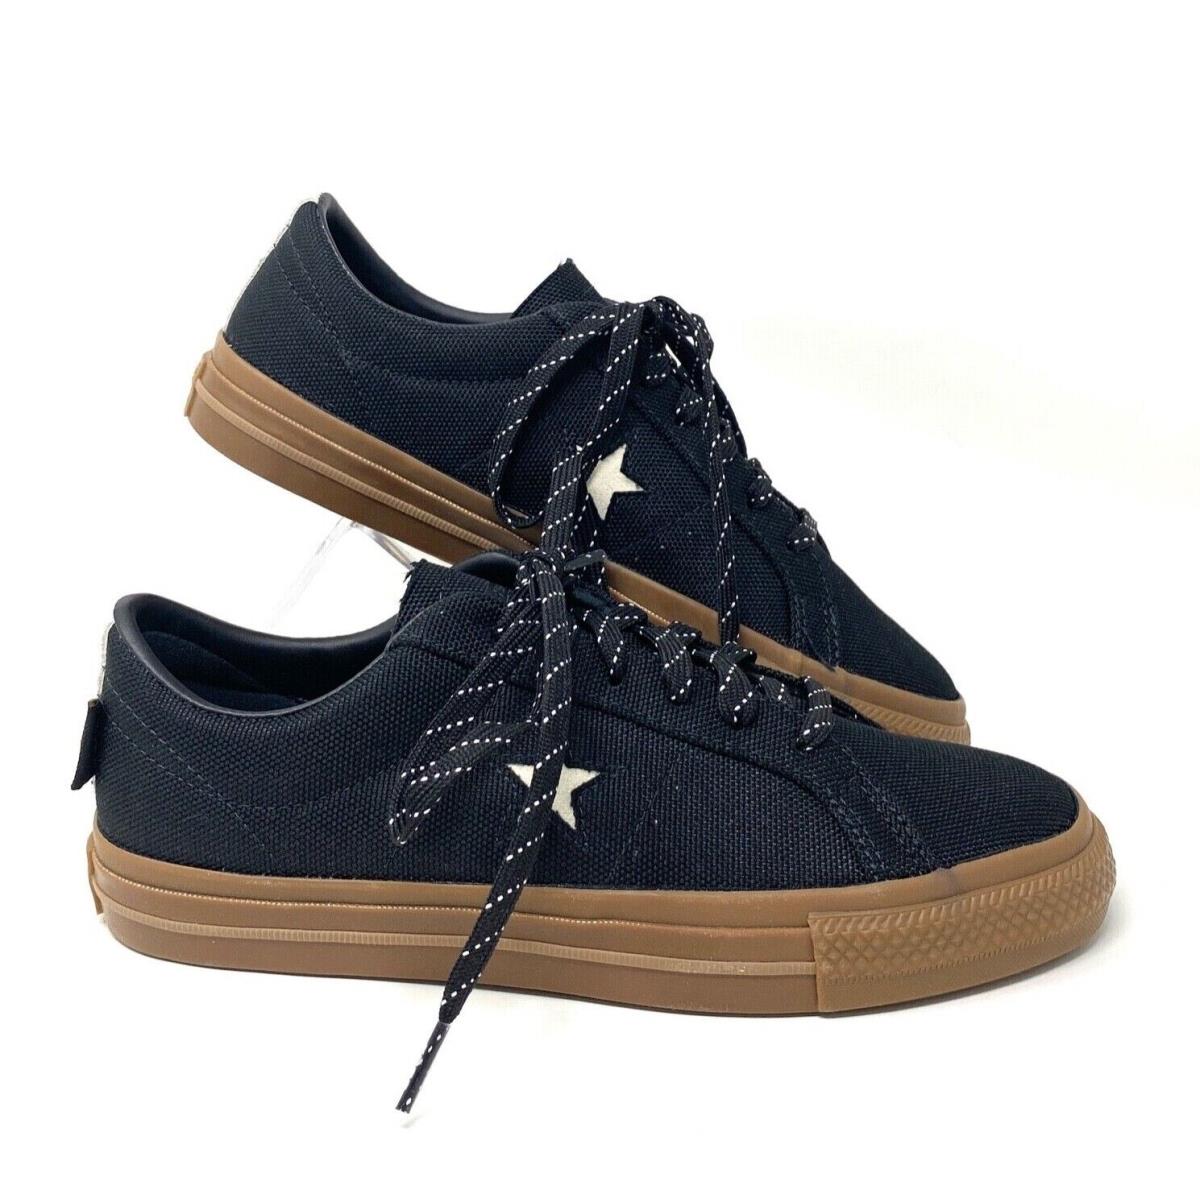 Converse One Star Pro OX Low Top Black Women Canvas Sneakers Skate Size A03217C